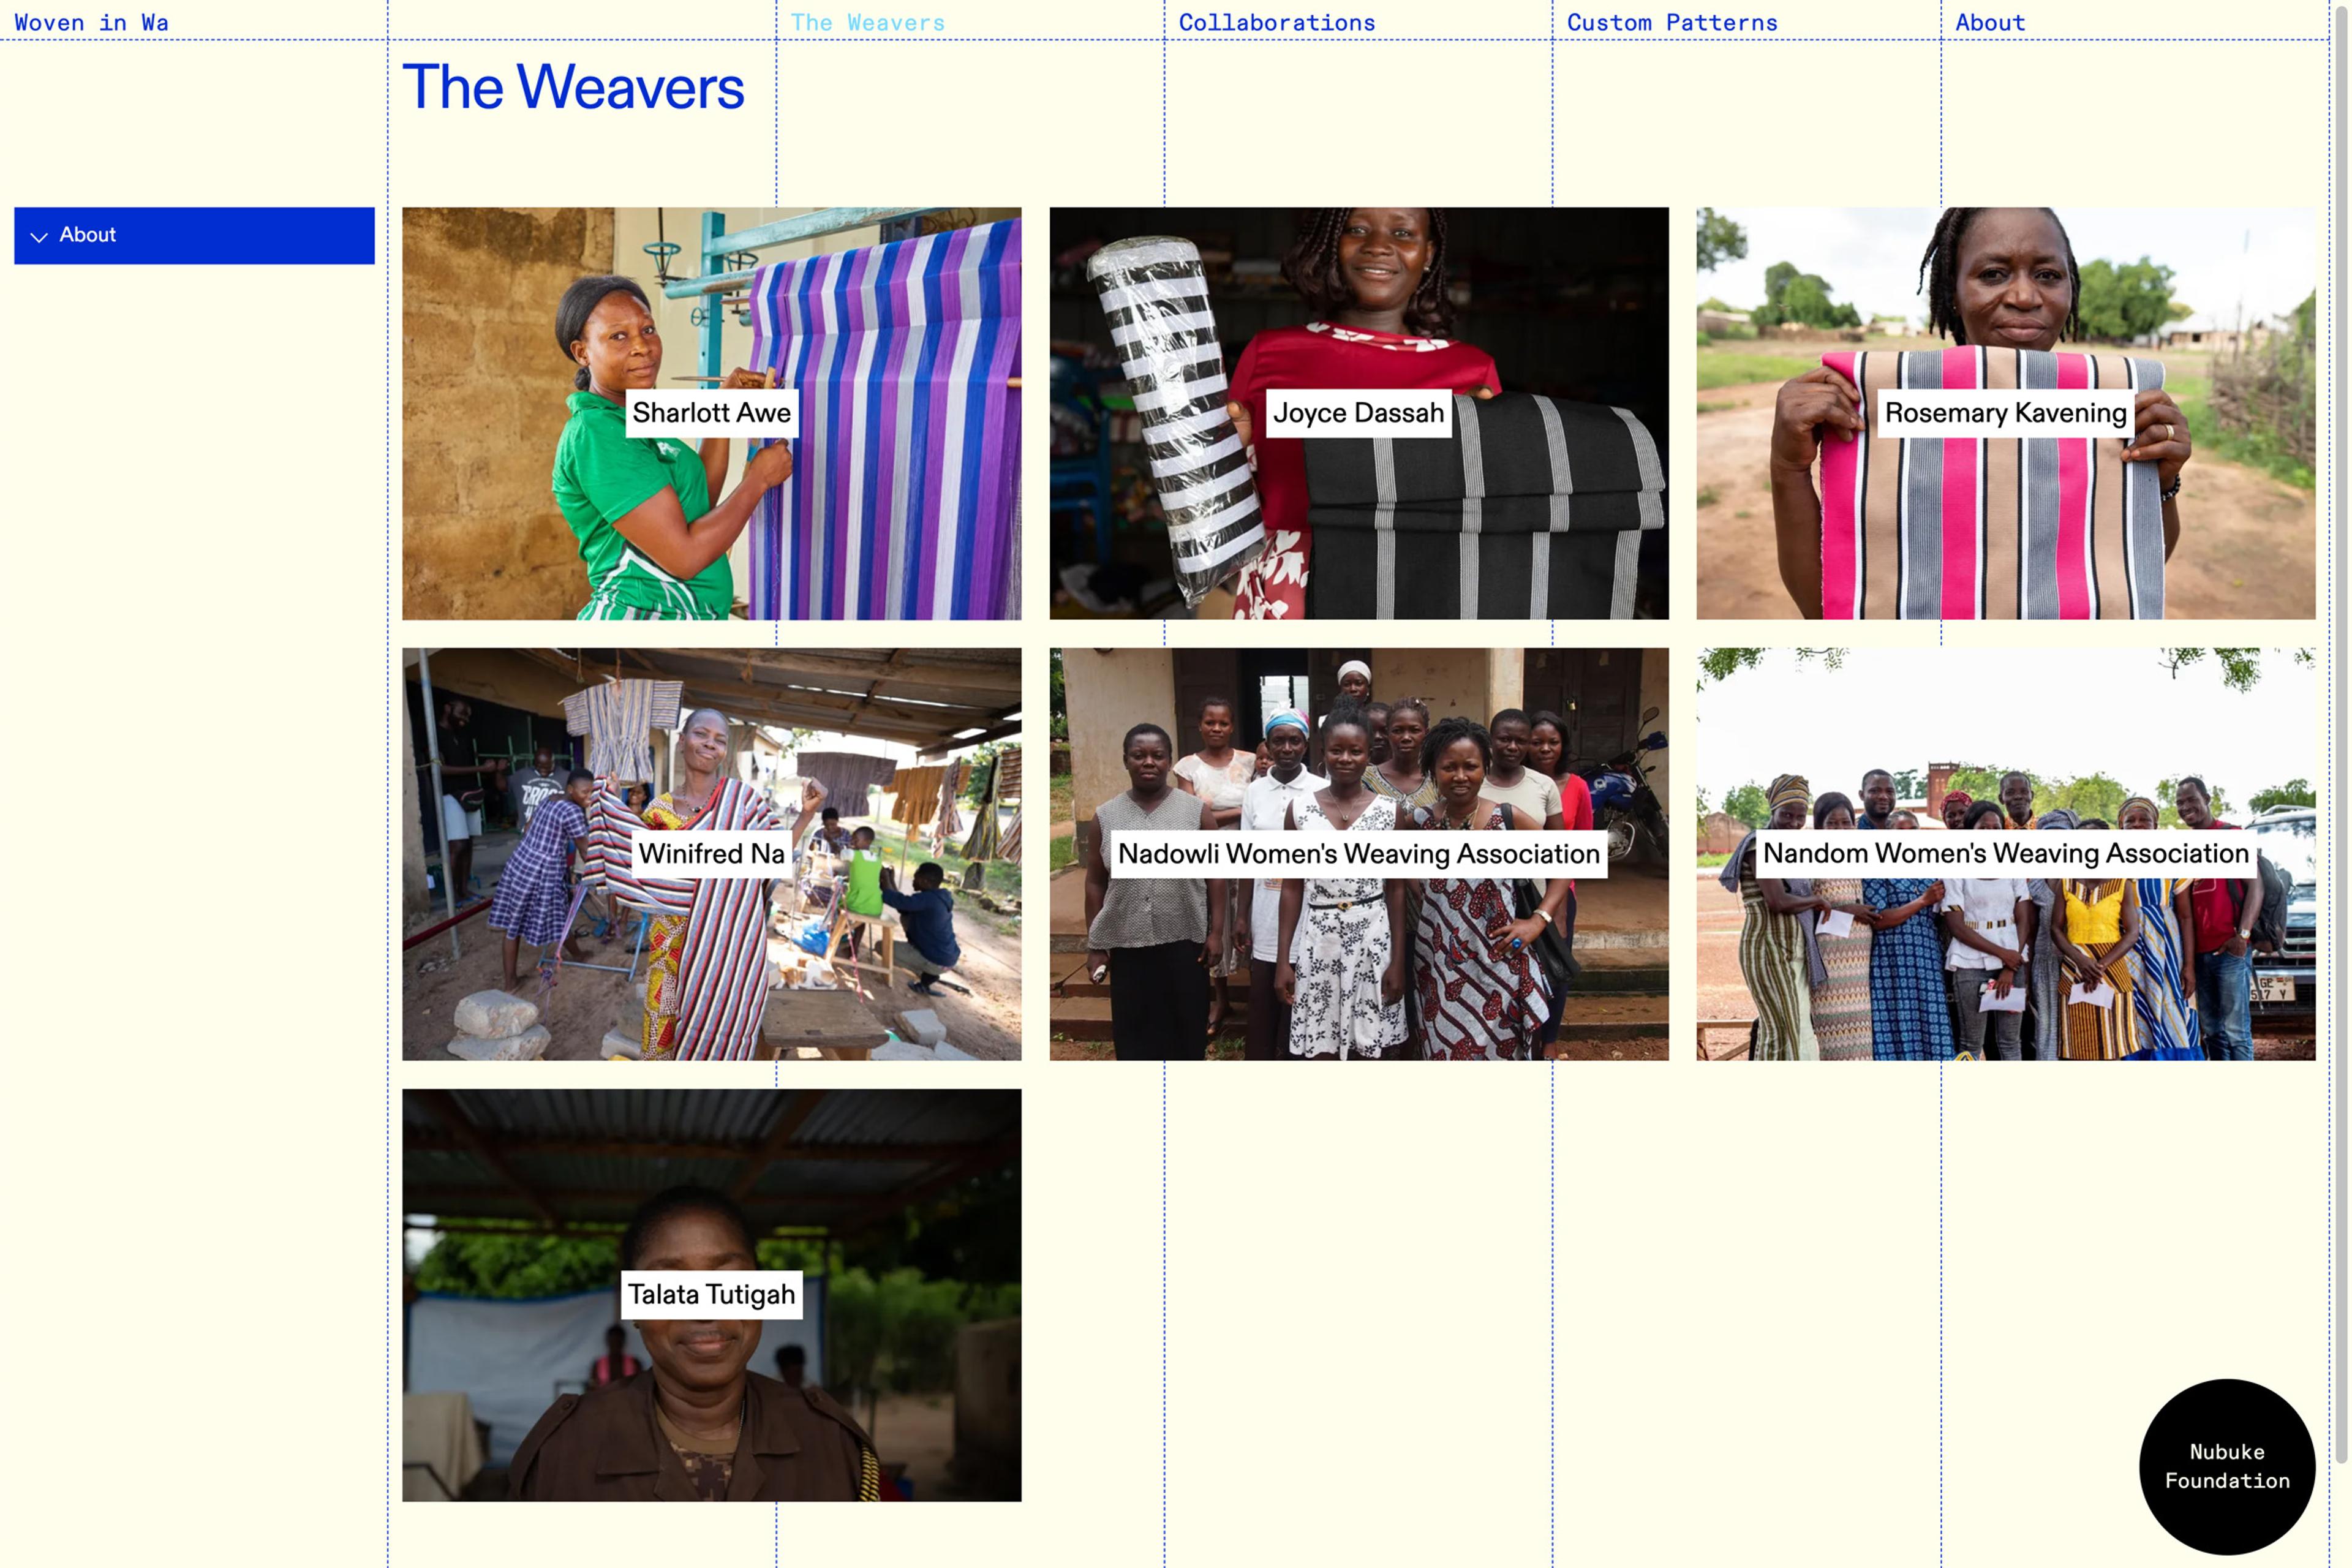 A screengrab from the Woven in Wa website, showing an image grid of weavers involved in the project